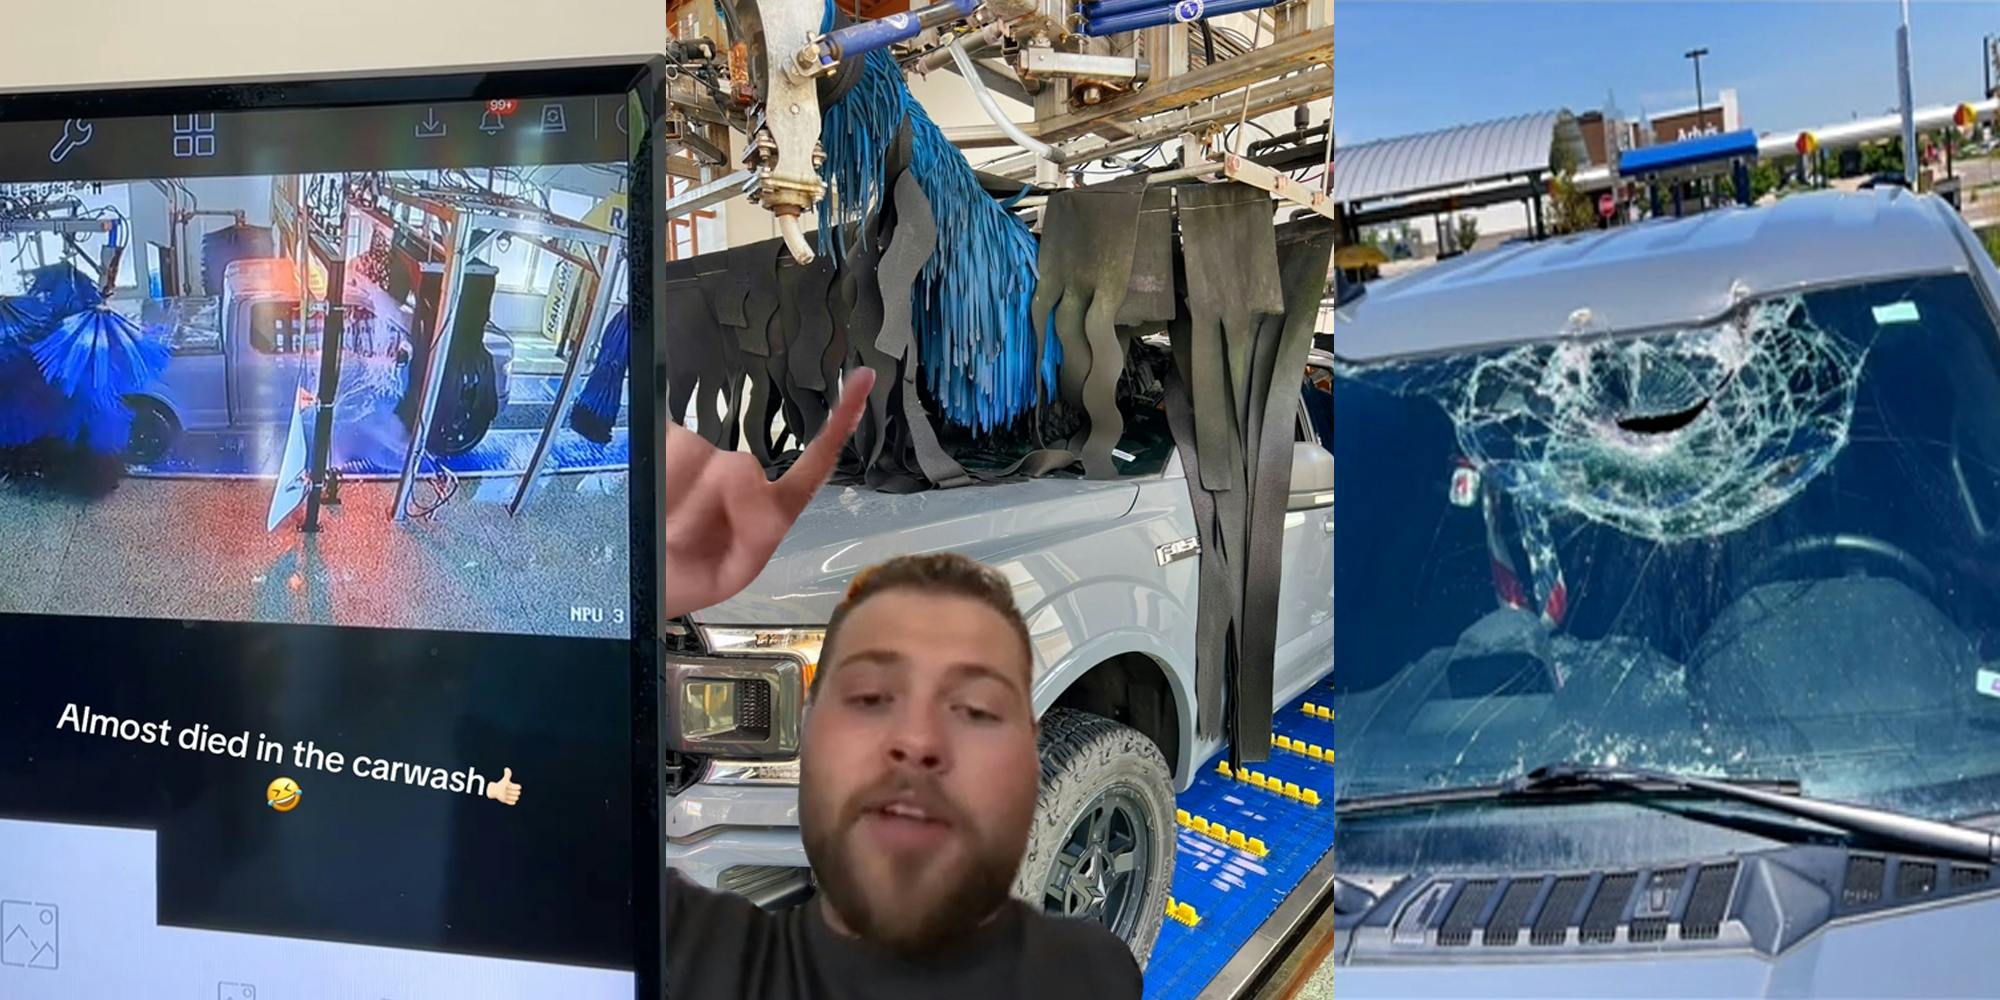 security footage of carwash showing truck with caption "Almost died in the carwash" (l) man greenscreen TikTok over image of truck with carwash equipment damaging vehicle (c) smashed windshield of truck (r)